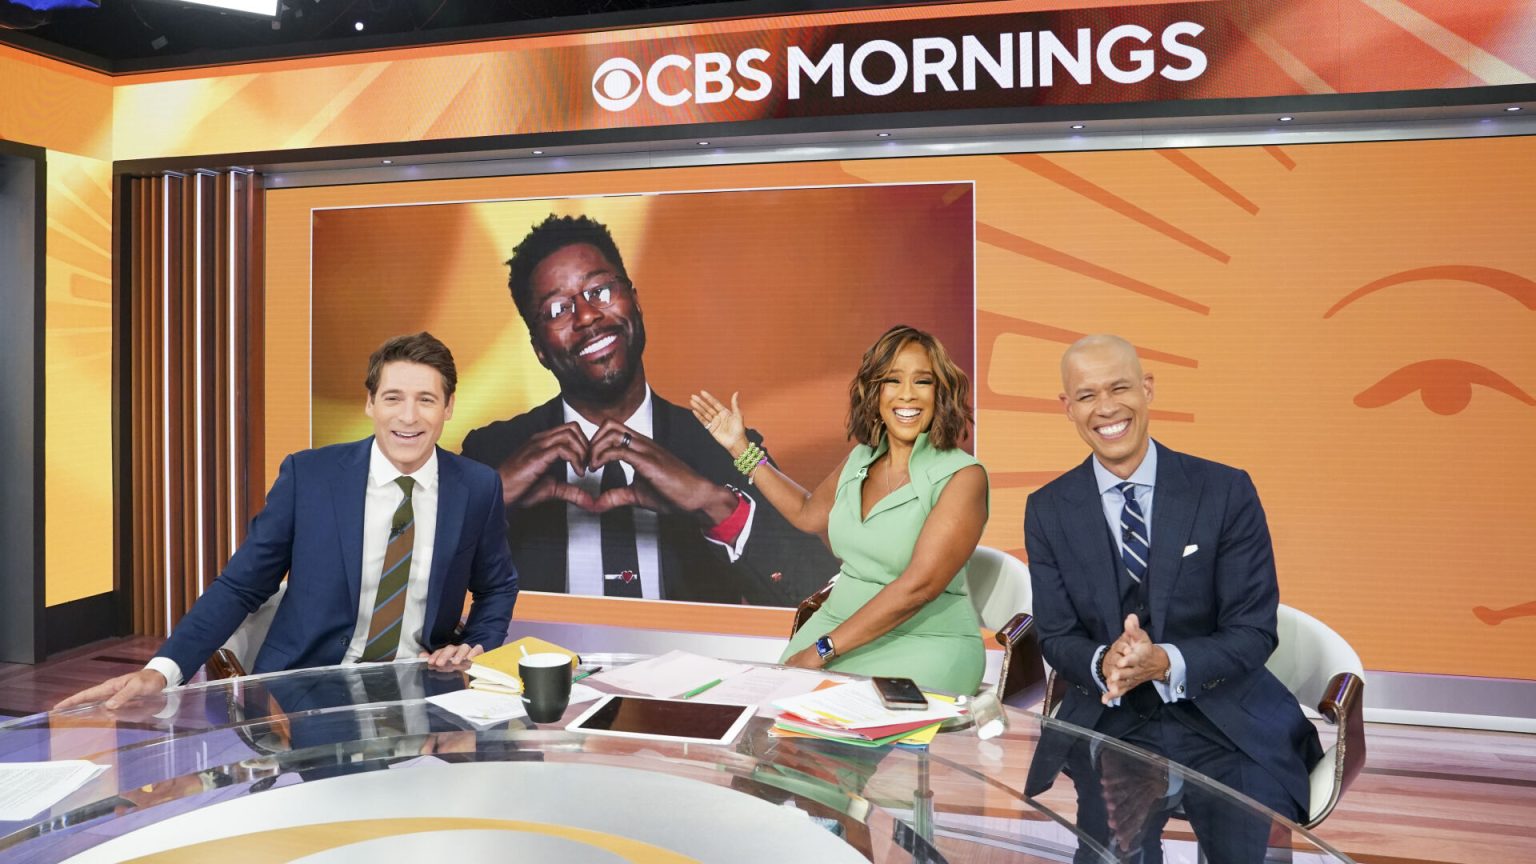 CBS Mornings Today Friday March 31, 2023 Memorable TV